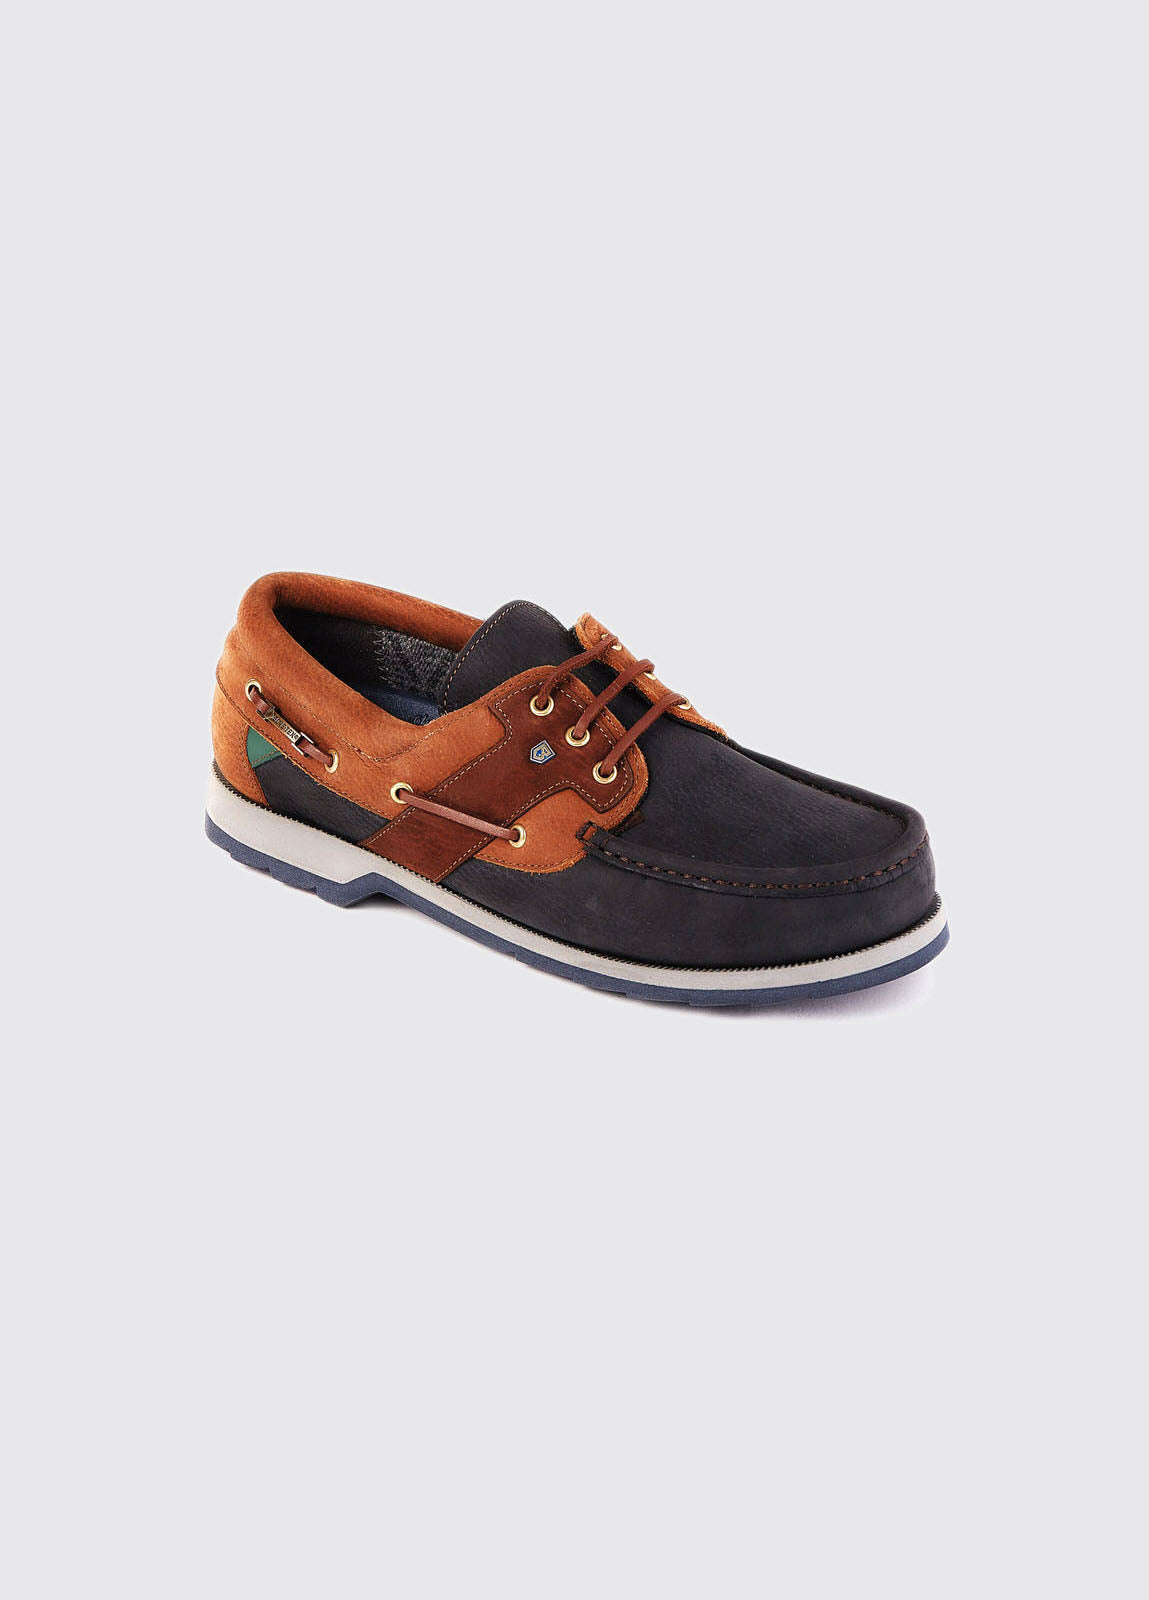 Angled view of the Dubarry Clipper Deck Shoe - Navy/Brown.